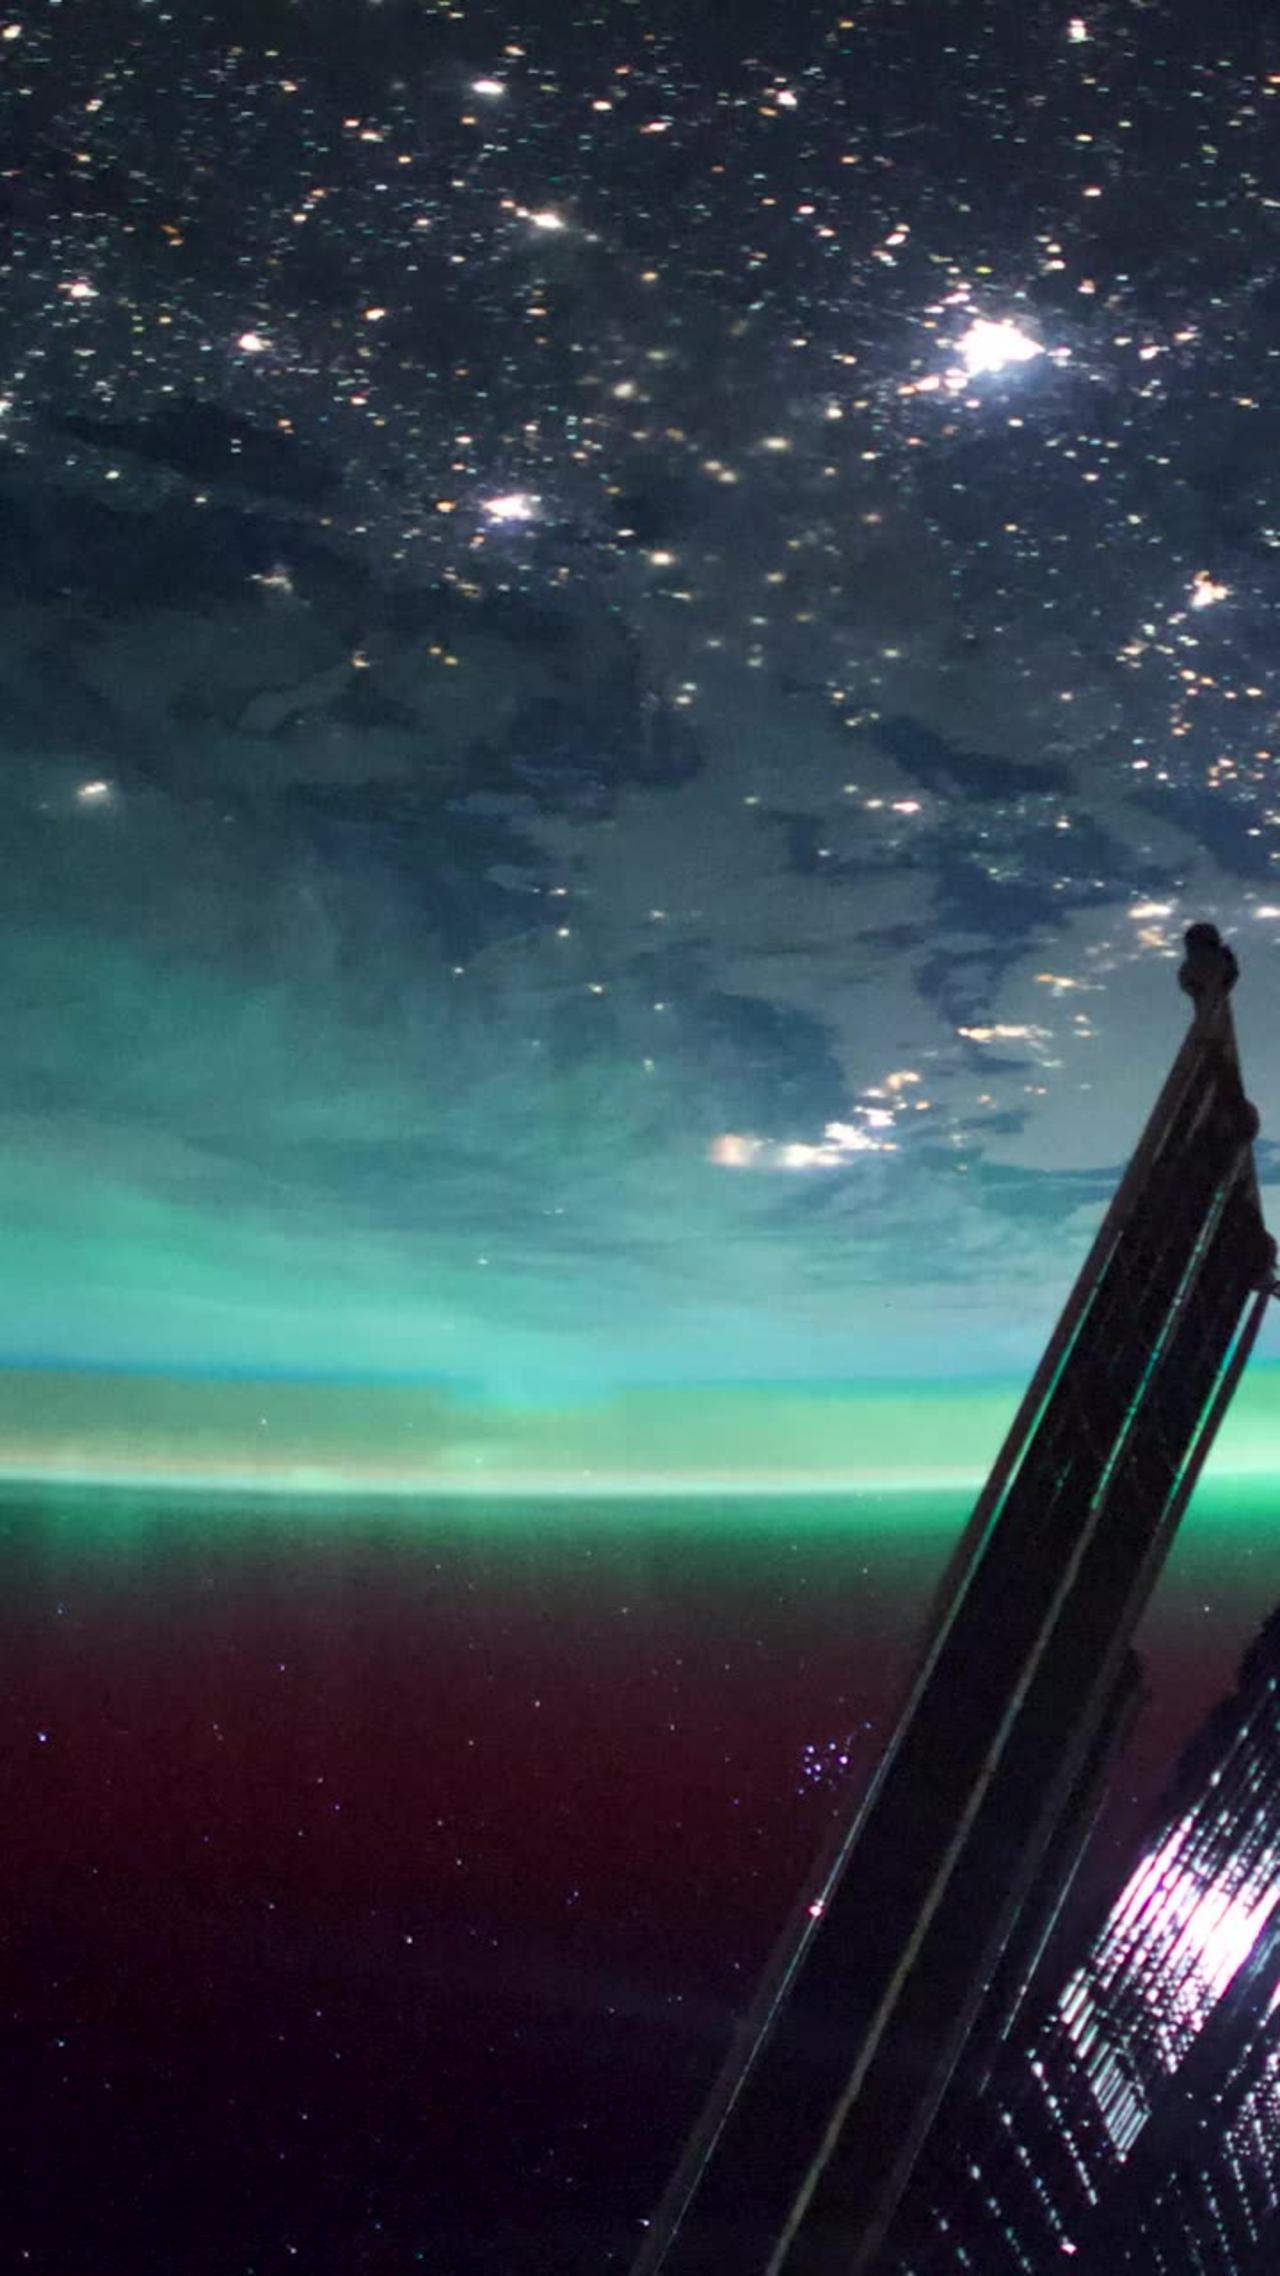 Northern lights from international space station